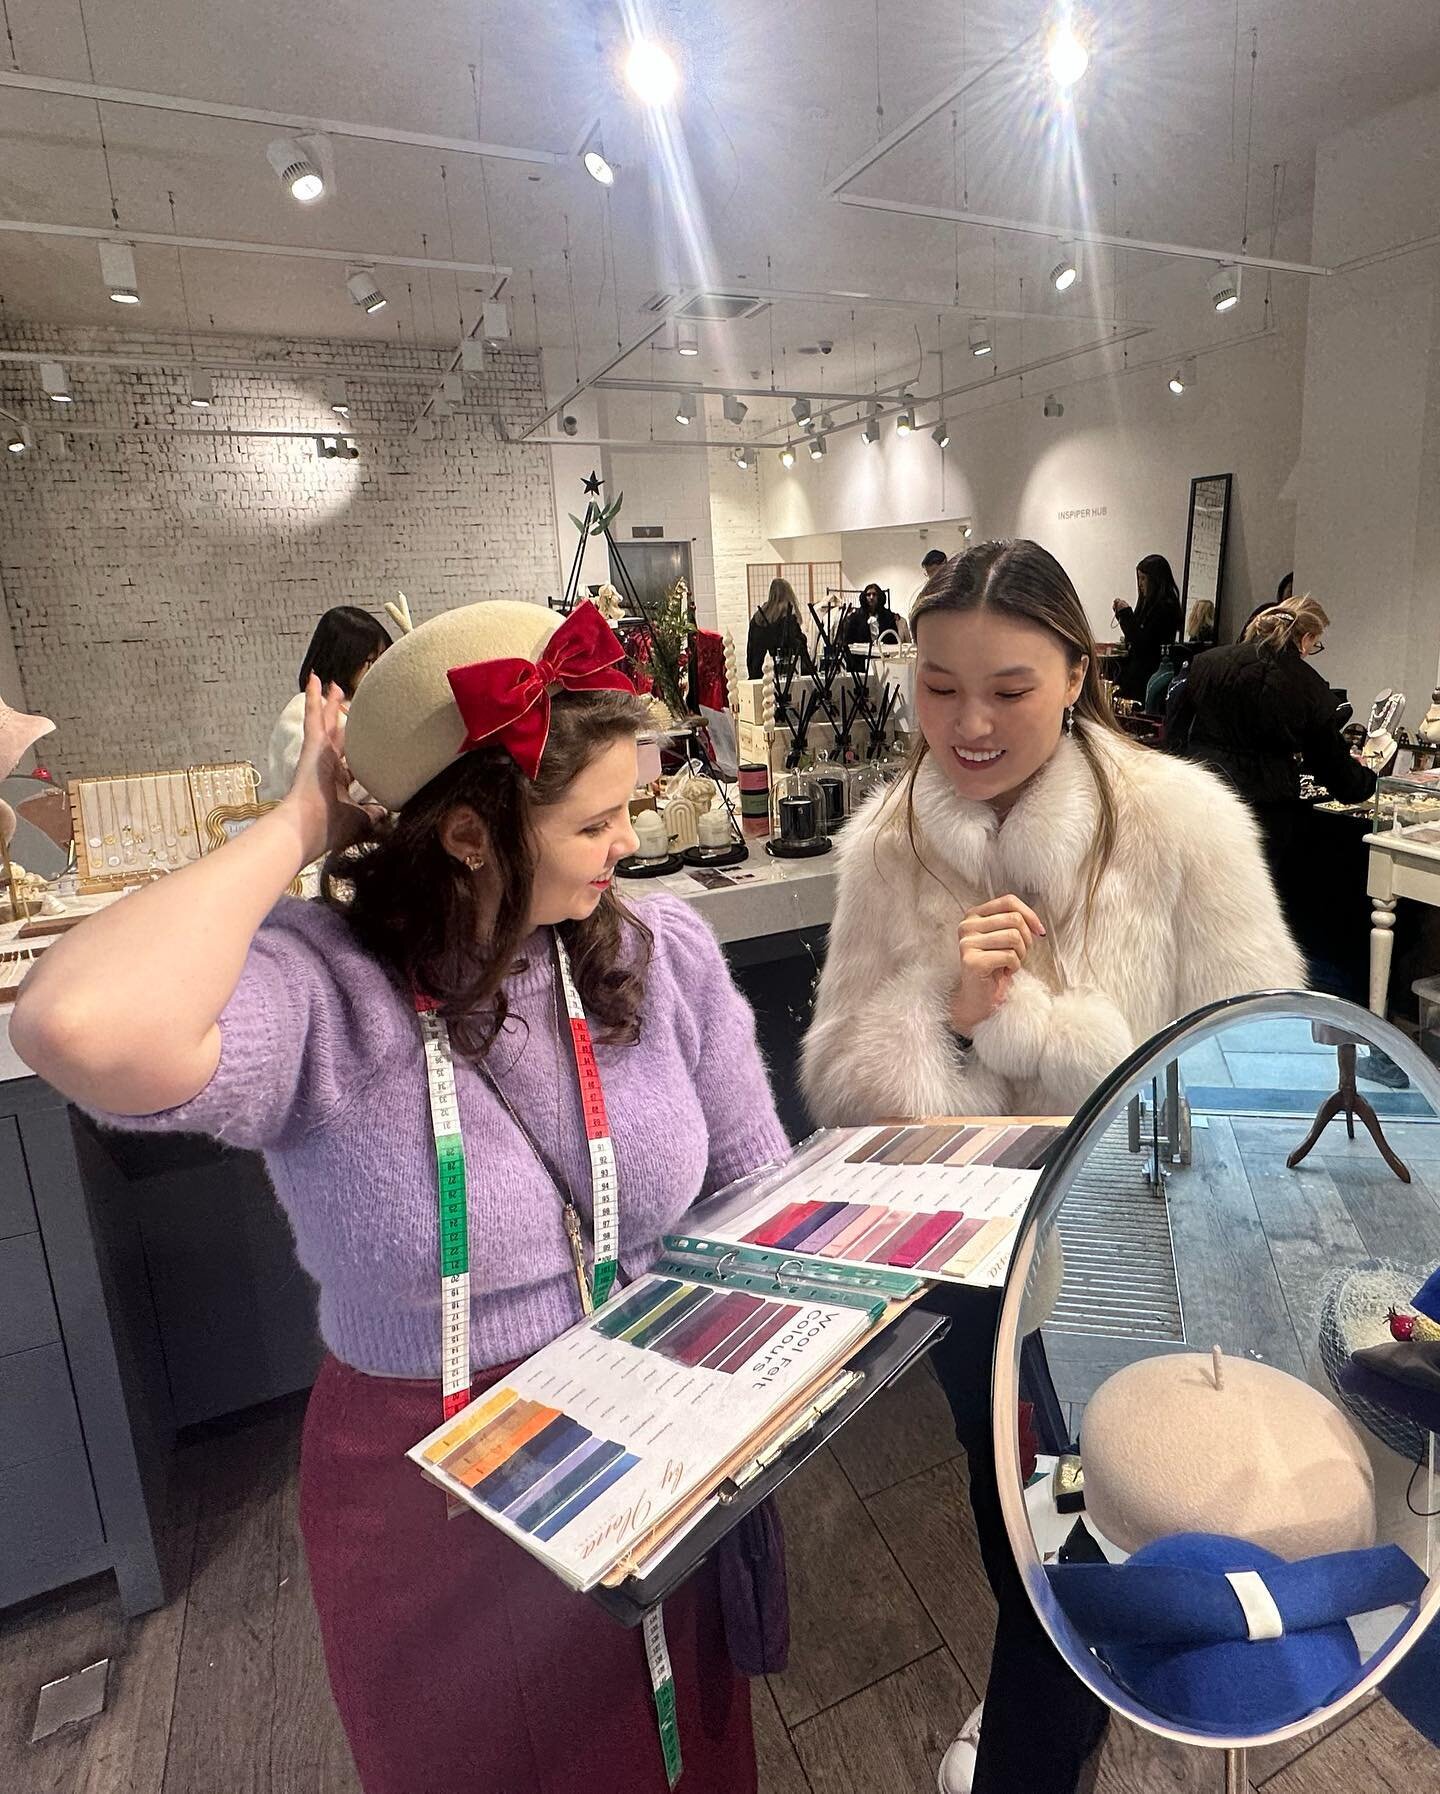 Do you want to personalised a beautiful hat for your Christmas gift?

Visiting us today

INSPIRER HUB Designer Concept Pop up &amp; Gallery 

Location：177-180 Piccadilly， St James, London W1J 9ER 

#popupLondon
 #londonfashion
#designerbrands #artist